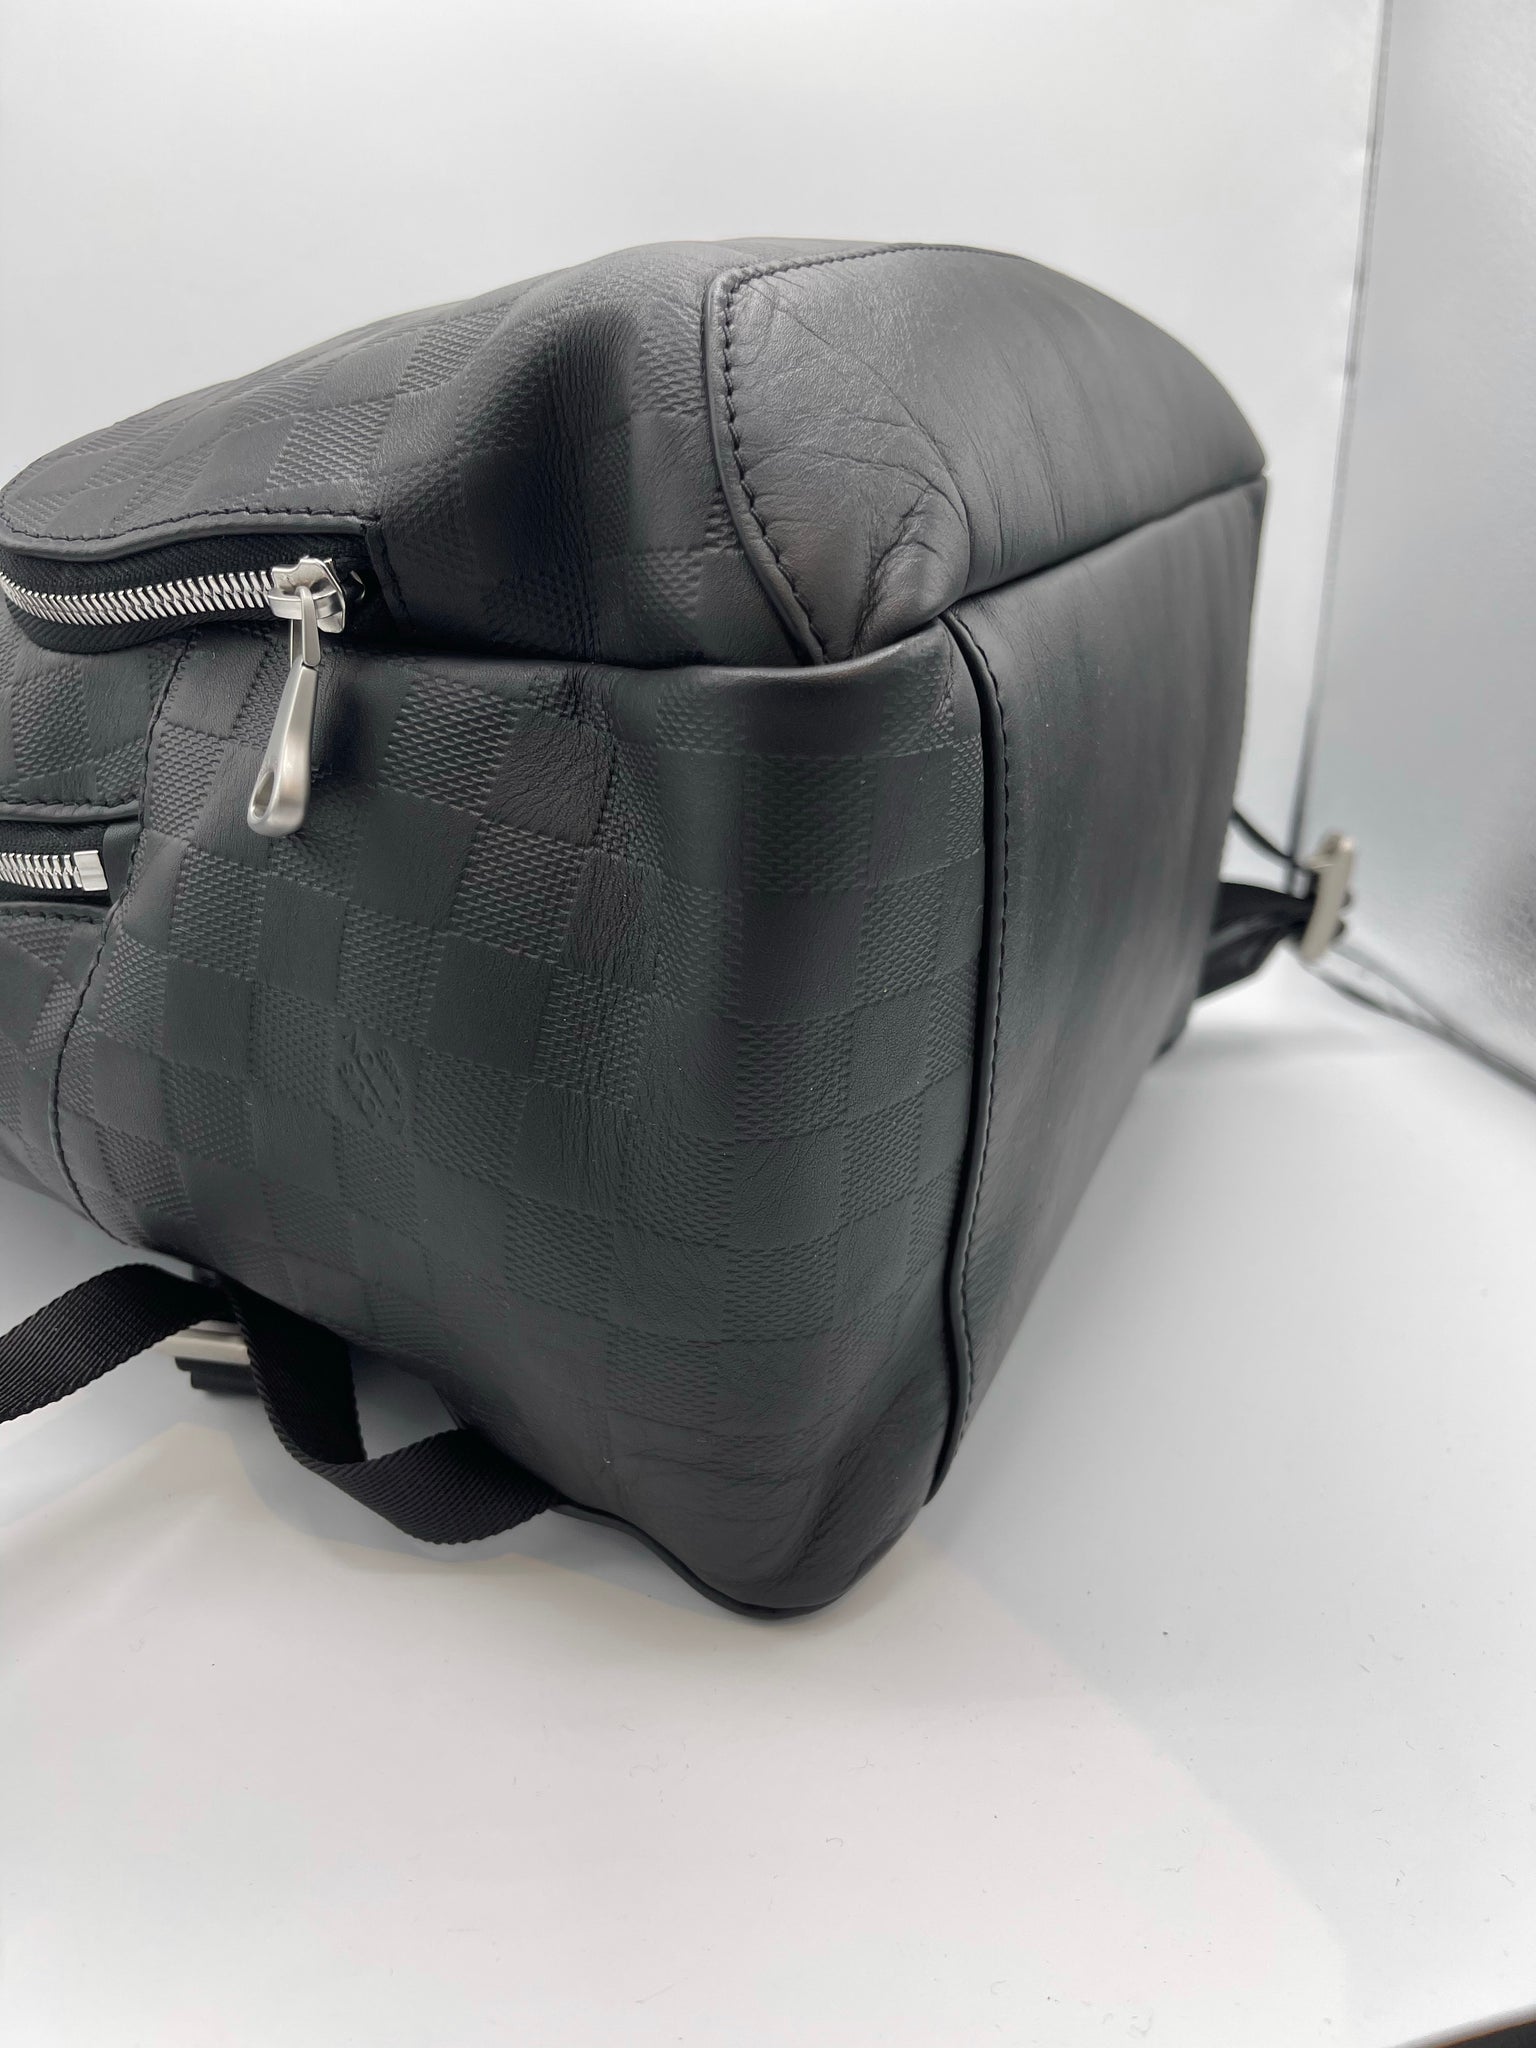 Louis Vuitton Damier Infini Leather Onyx Avenue Backpack – Sacdelux